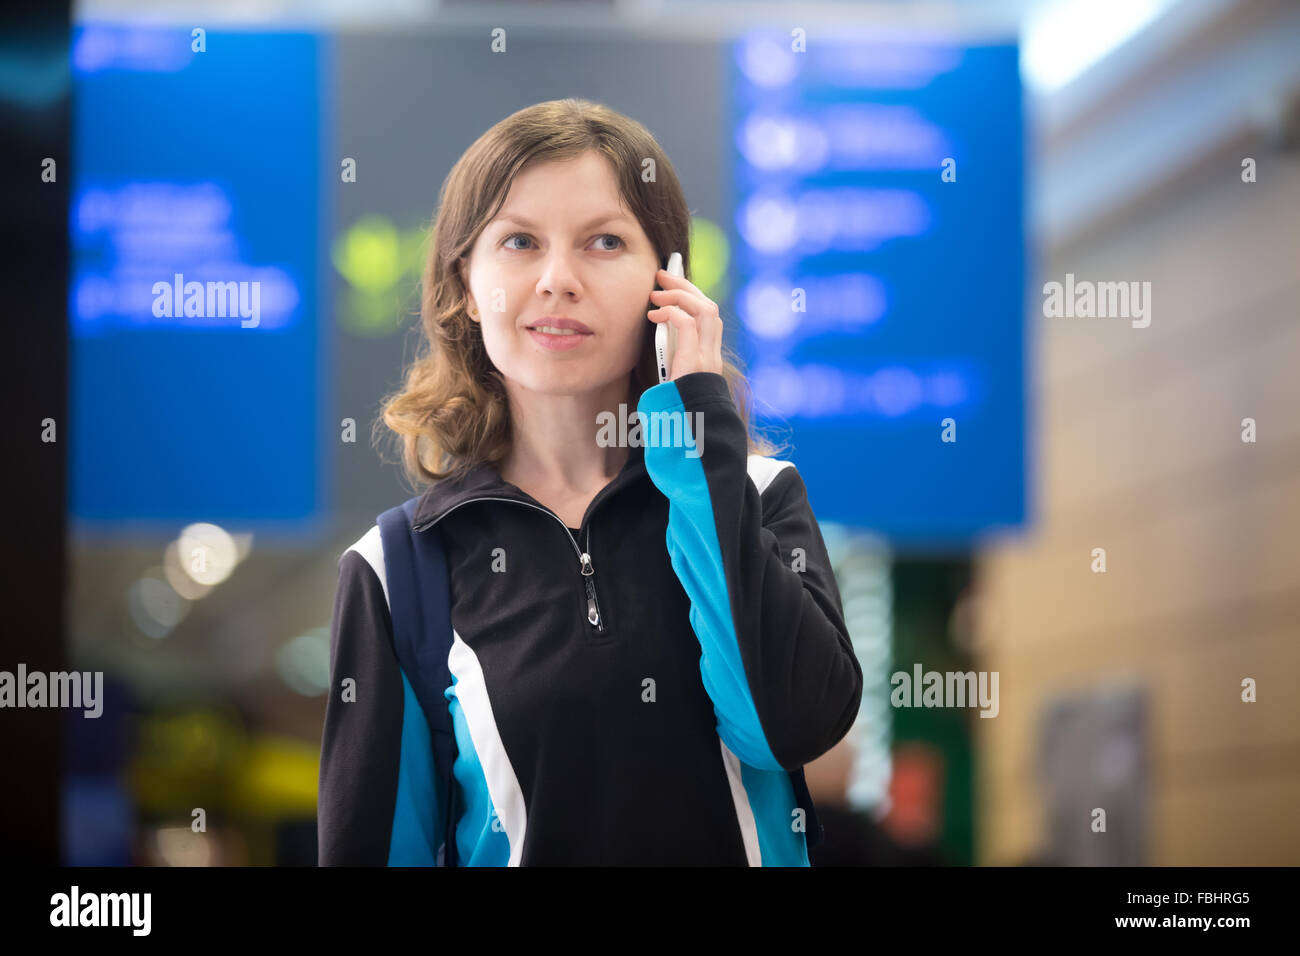 Portrait of smiling young woman in 20s with backpack walking in airport terminal, using smart phone, talking on mobile phone, bl Stock Photo